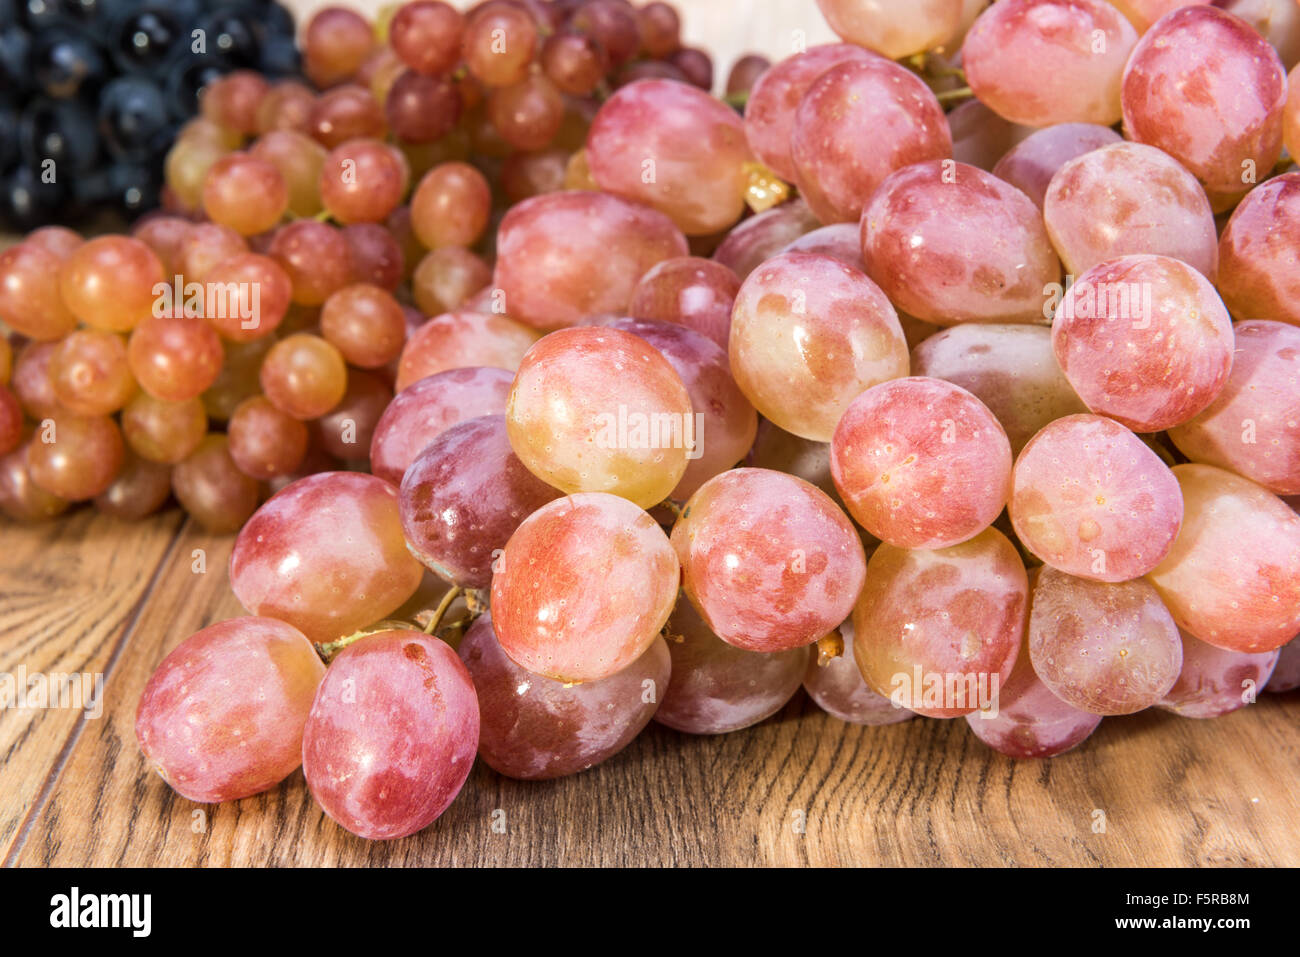 Pink dessert grapes from Central Asia (Samarkand) Stock Photo